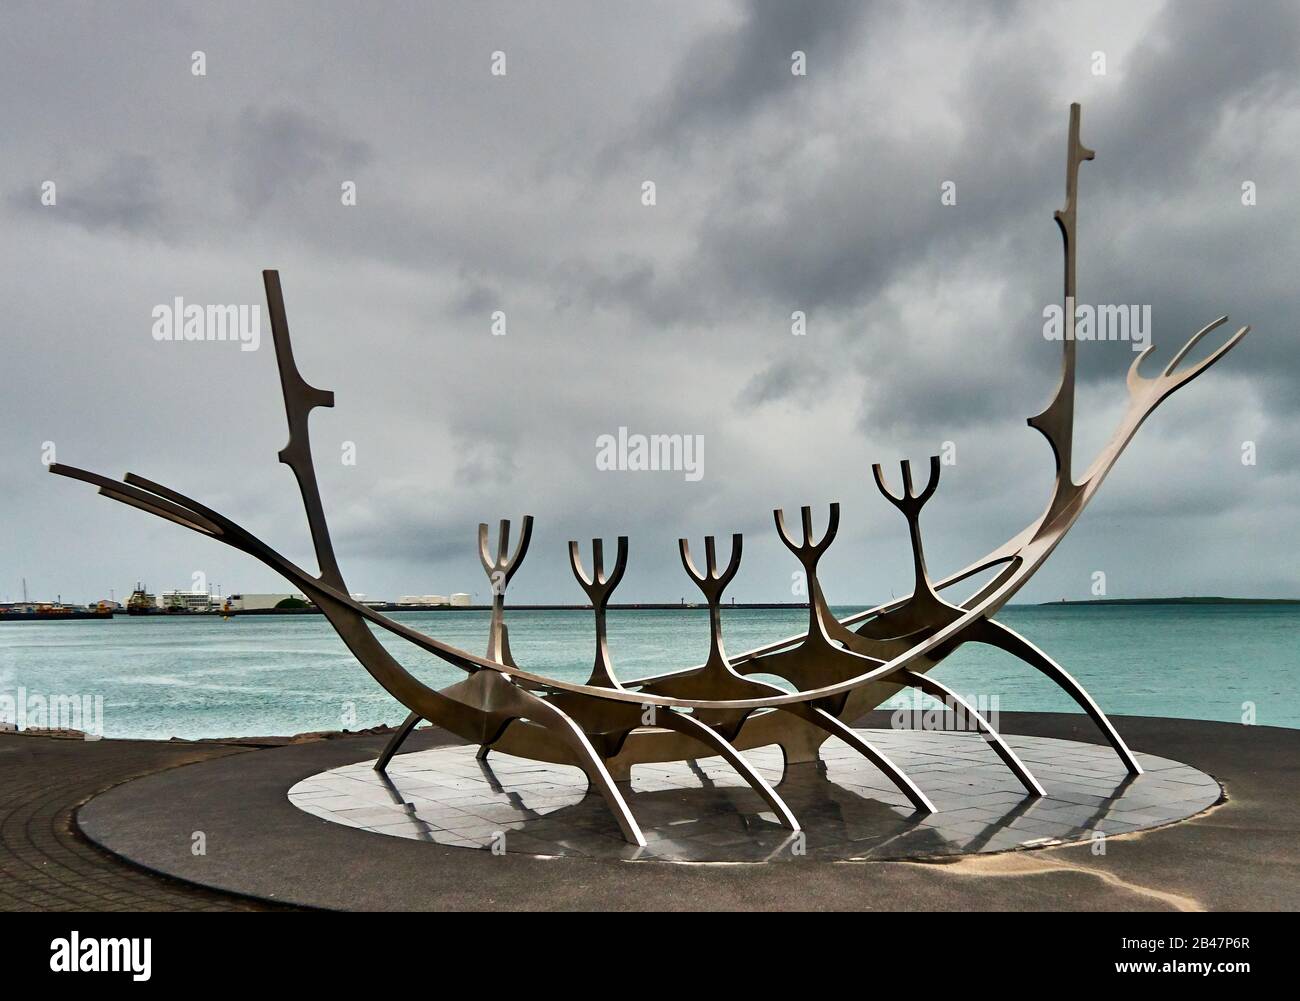 Europe ,Iceland , Reykjavik,Sun Voyager (Icelandic: Sólfar) is a sculpture by Jón Gunnar Árnason, located next to the Sæbraut road in Reykjavík, Iceland. Sun Voyager is described as a dreamboat, or an ode to the sun. The artist intended it to convey the promise of undiscovered territory, a dream of hope, progress and freedom Stock Photo